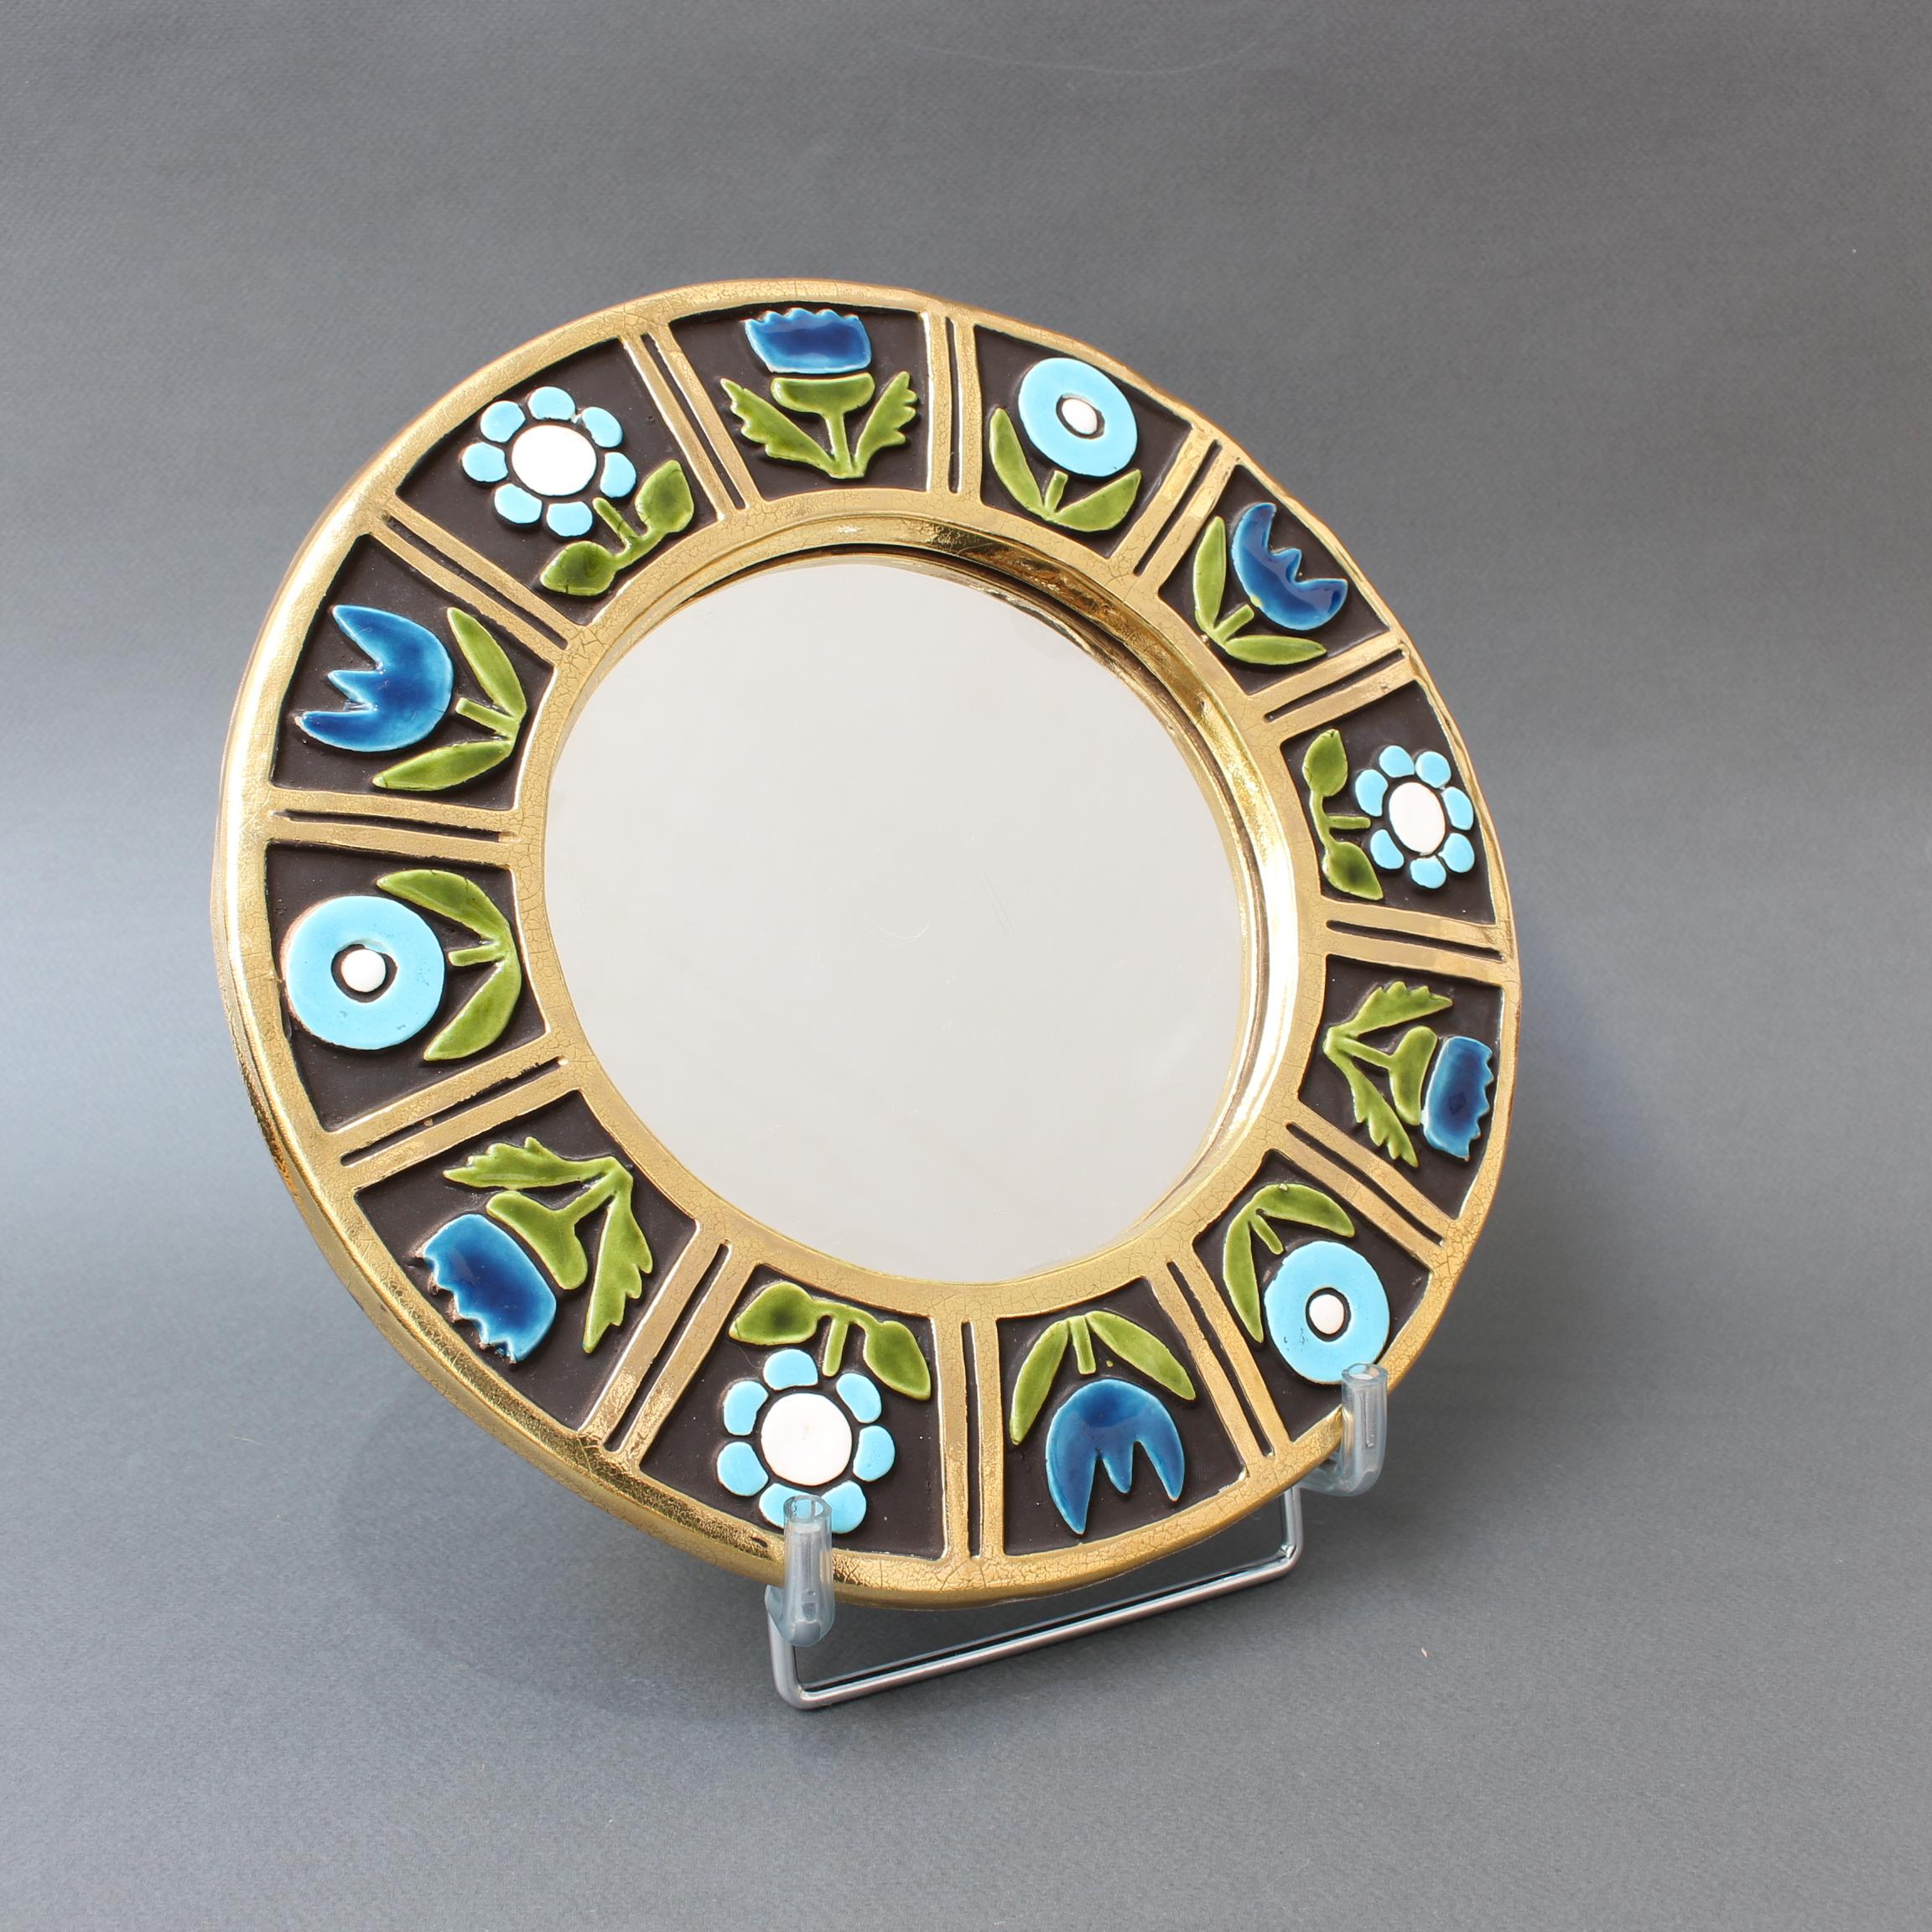 Ceramic wall mirror with flower motif (circa 1960s), by Mithé Espelt. A porthole-shaped decorative wall mirror delights the eye. The inner and outer frames are in a stunning gold craquelure. The enameled flowers are superimposed over a chocolate